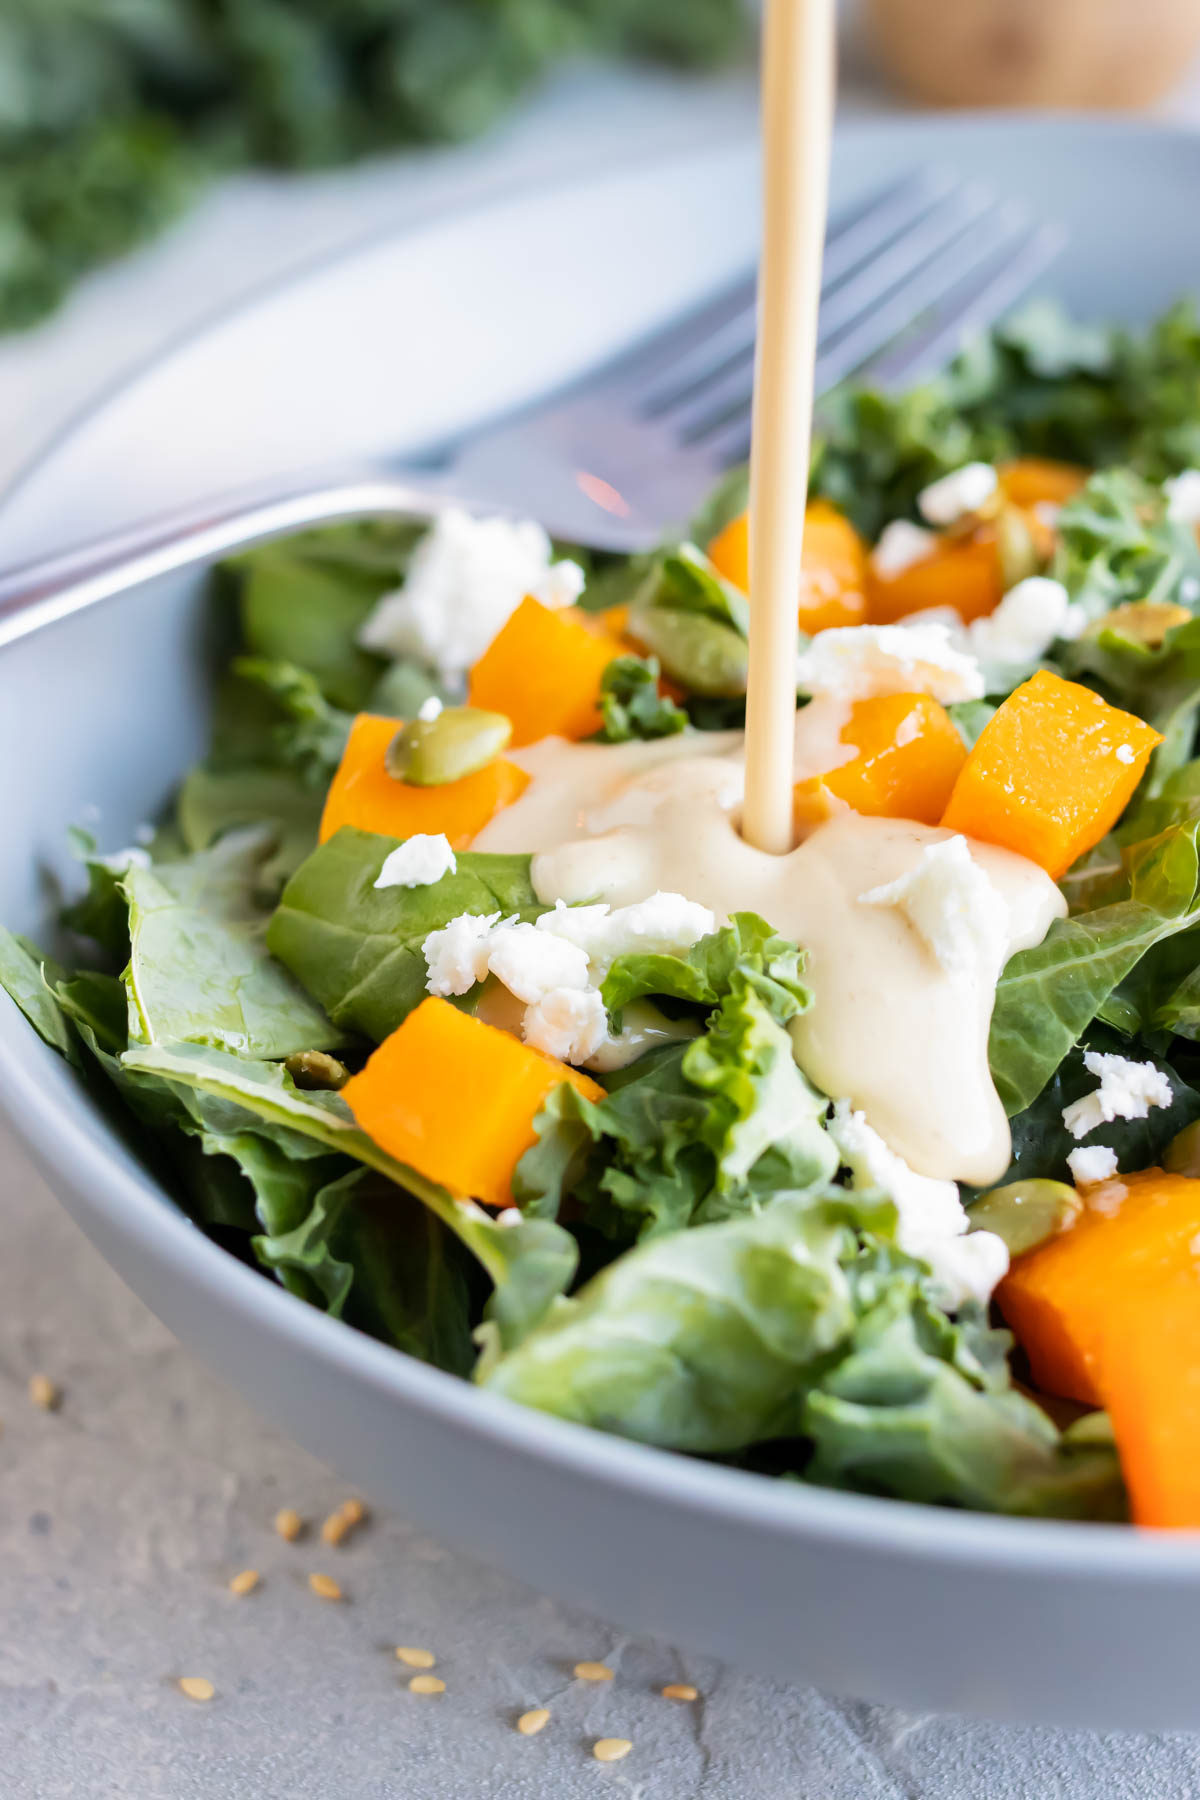 Creamy tahini dressing is poured over a salad